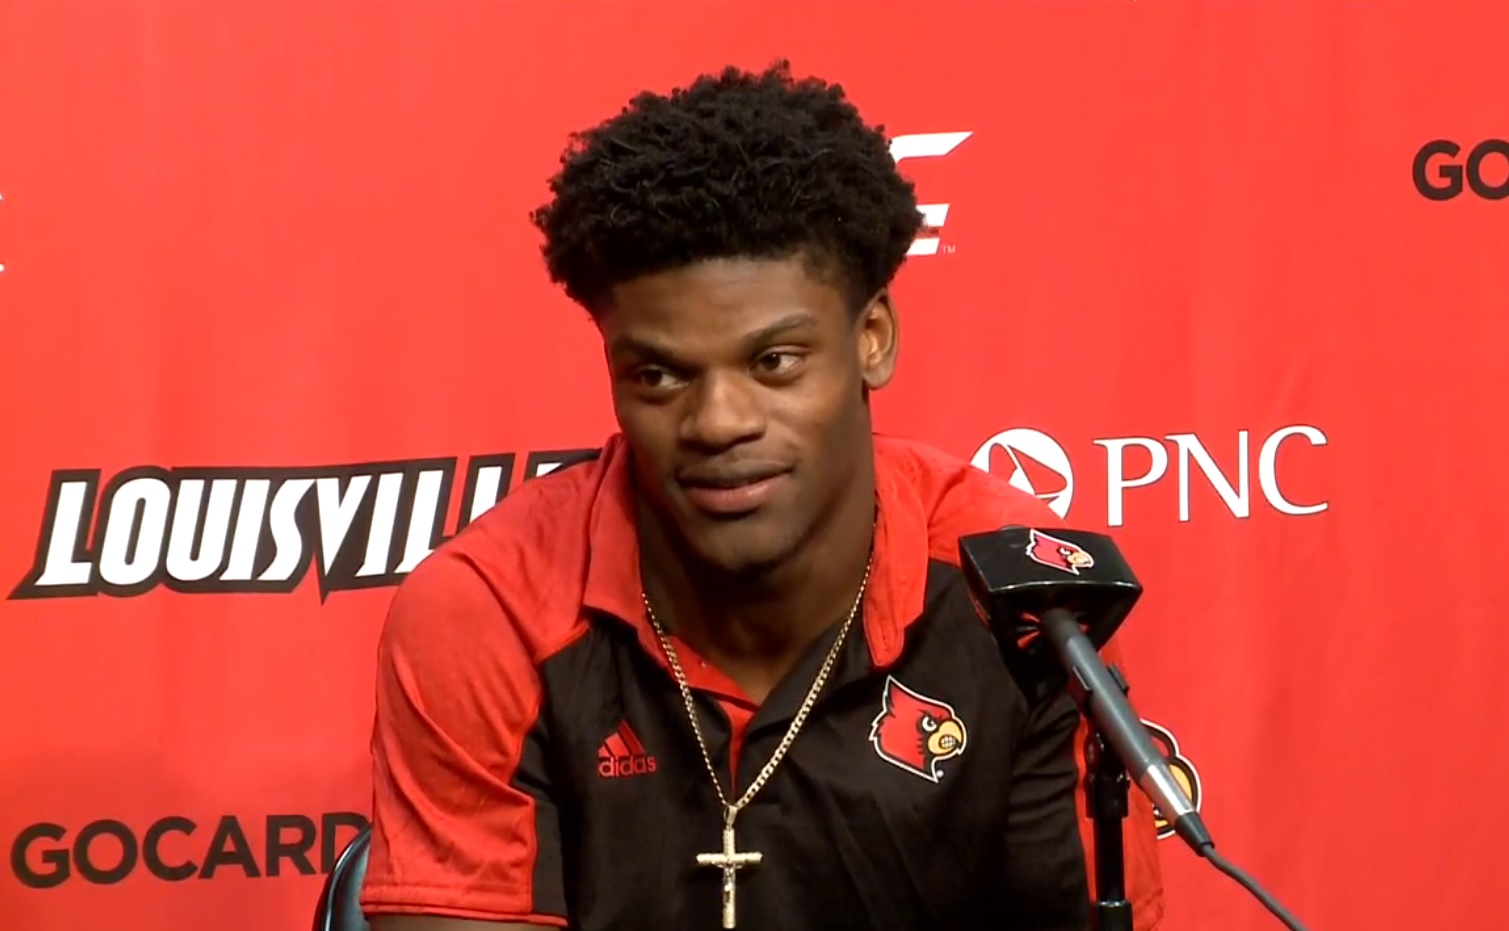 louisville-s-lamar-jackson-breaks-acc-record-for-career-rushing-yards-by-a-qb-whas11